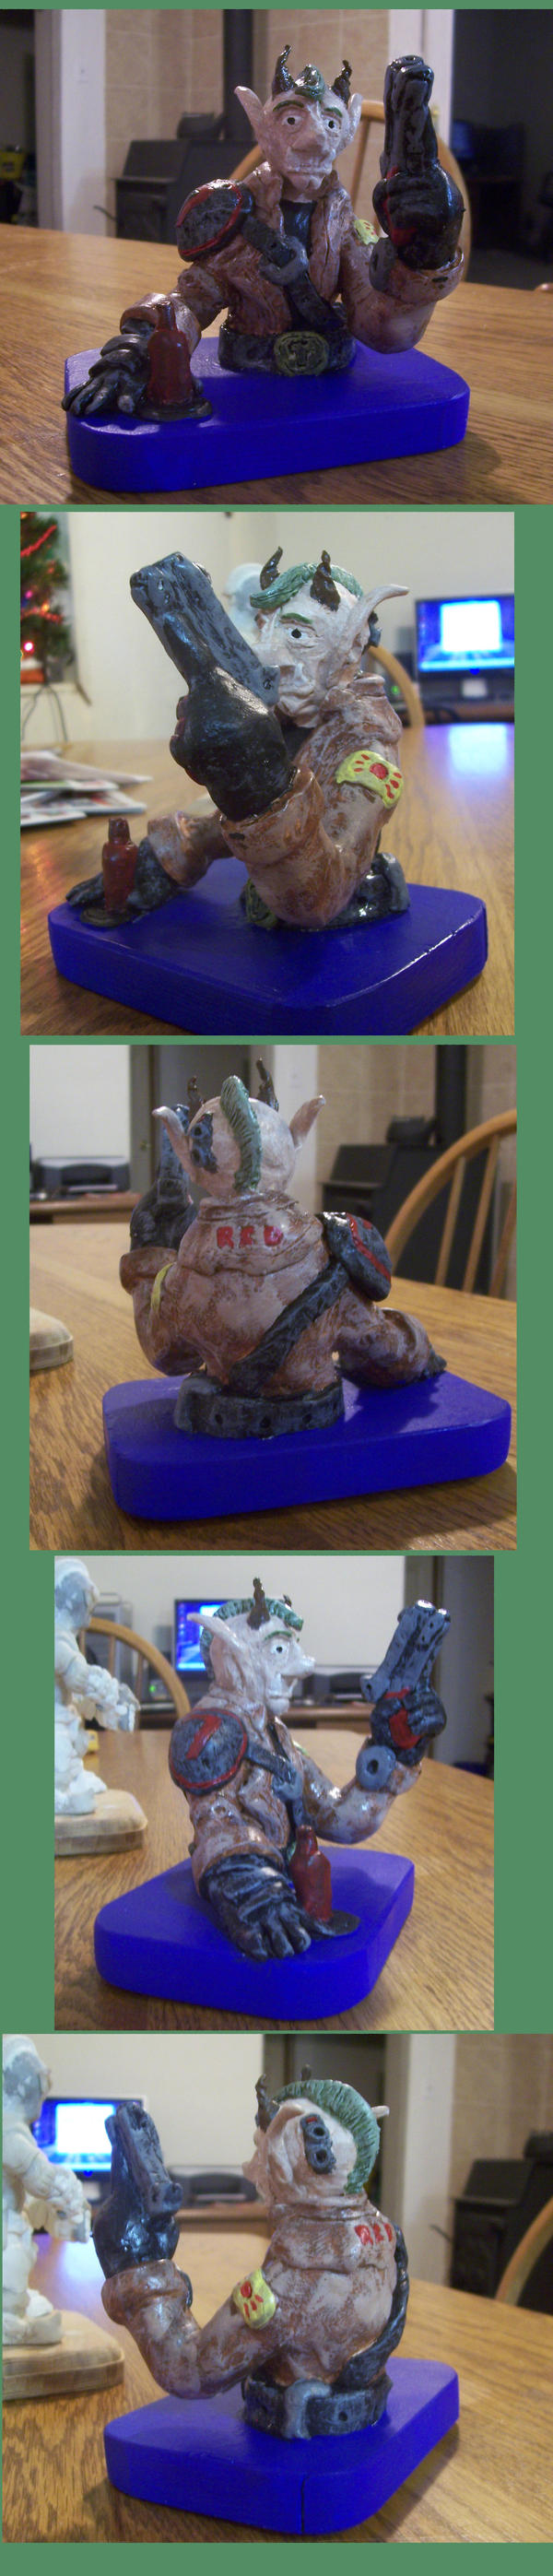 Troll Sculpture painted